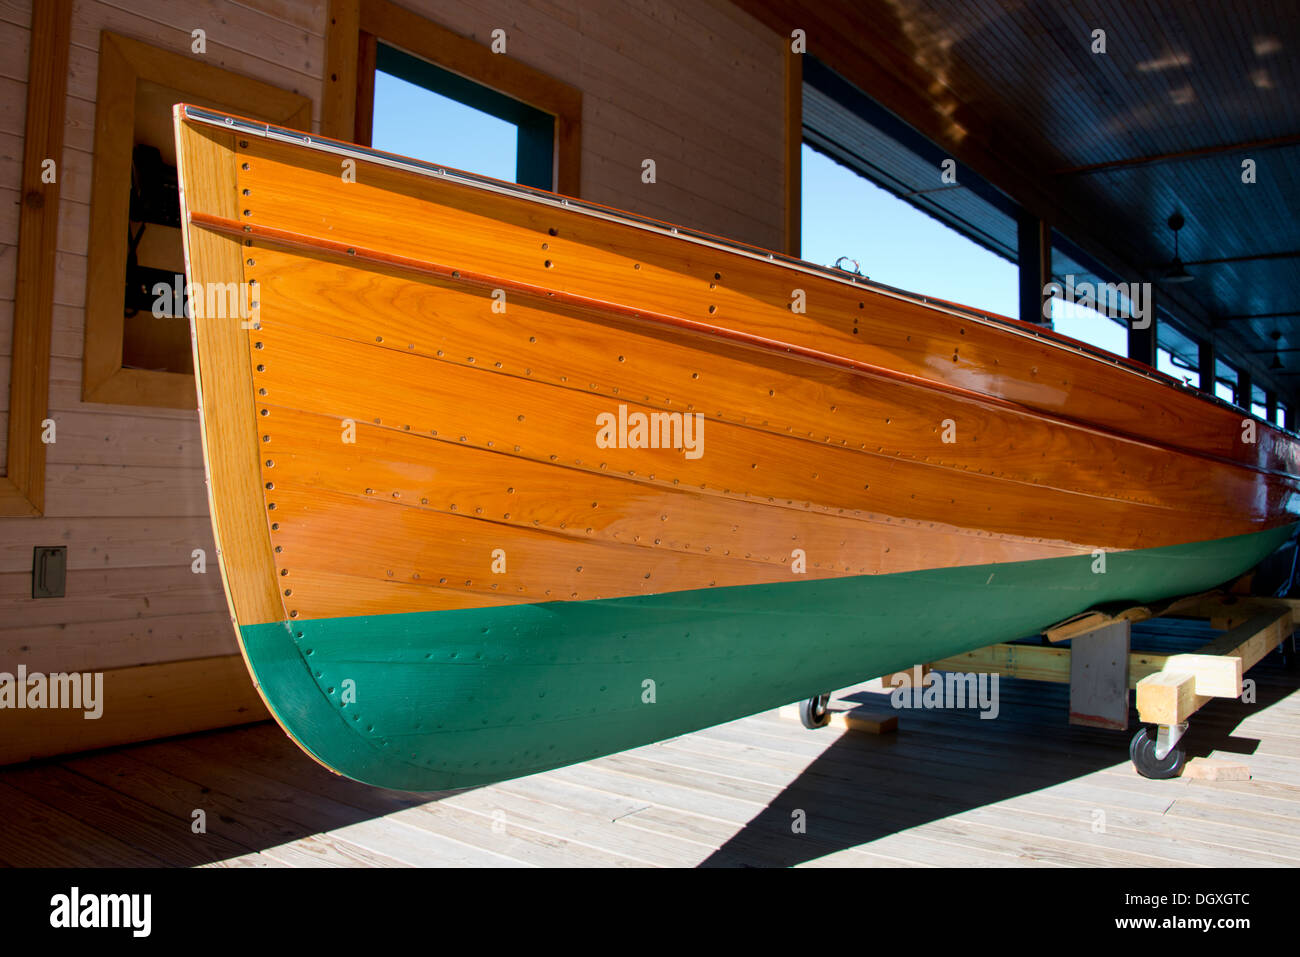 New York, Clayton. Antique Boat Museum. Bow of vintage wooden canoe. Stock Photo